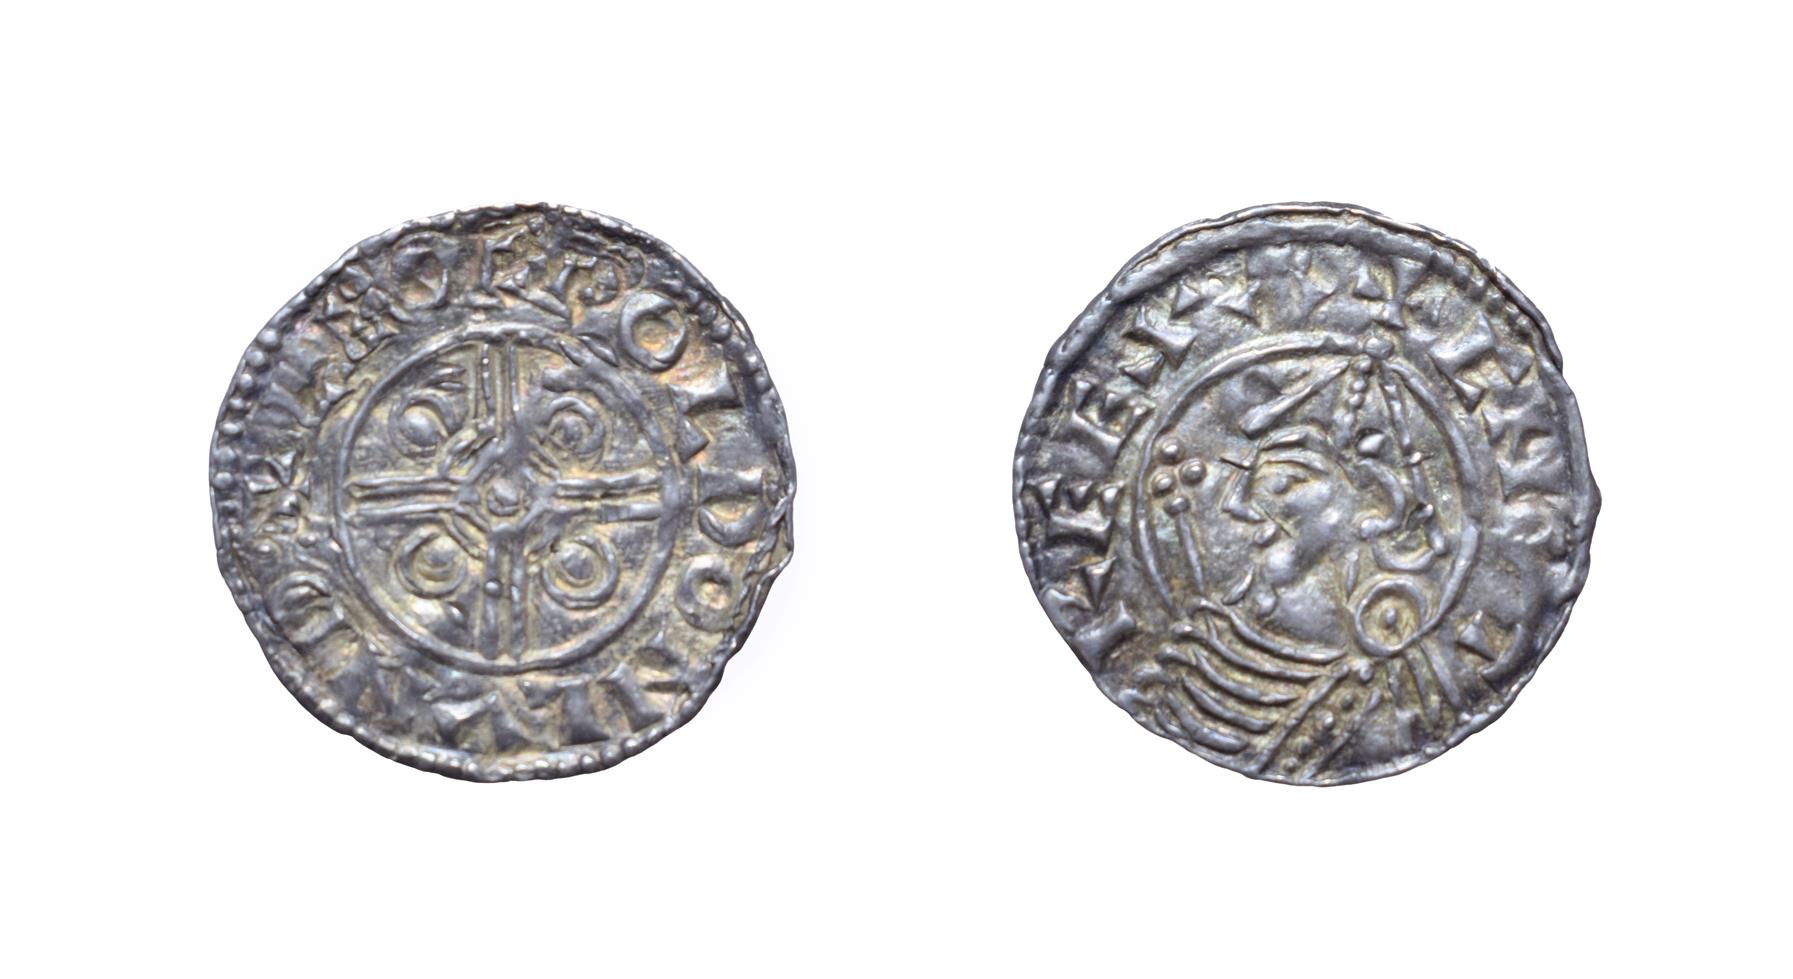 Cnut, 1016 - 1035, London Mint Penny. 1.01g, 19.2mm, 3h. Pointed helmet type, Leofwold at London.